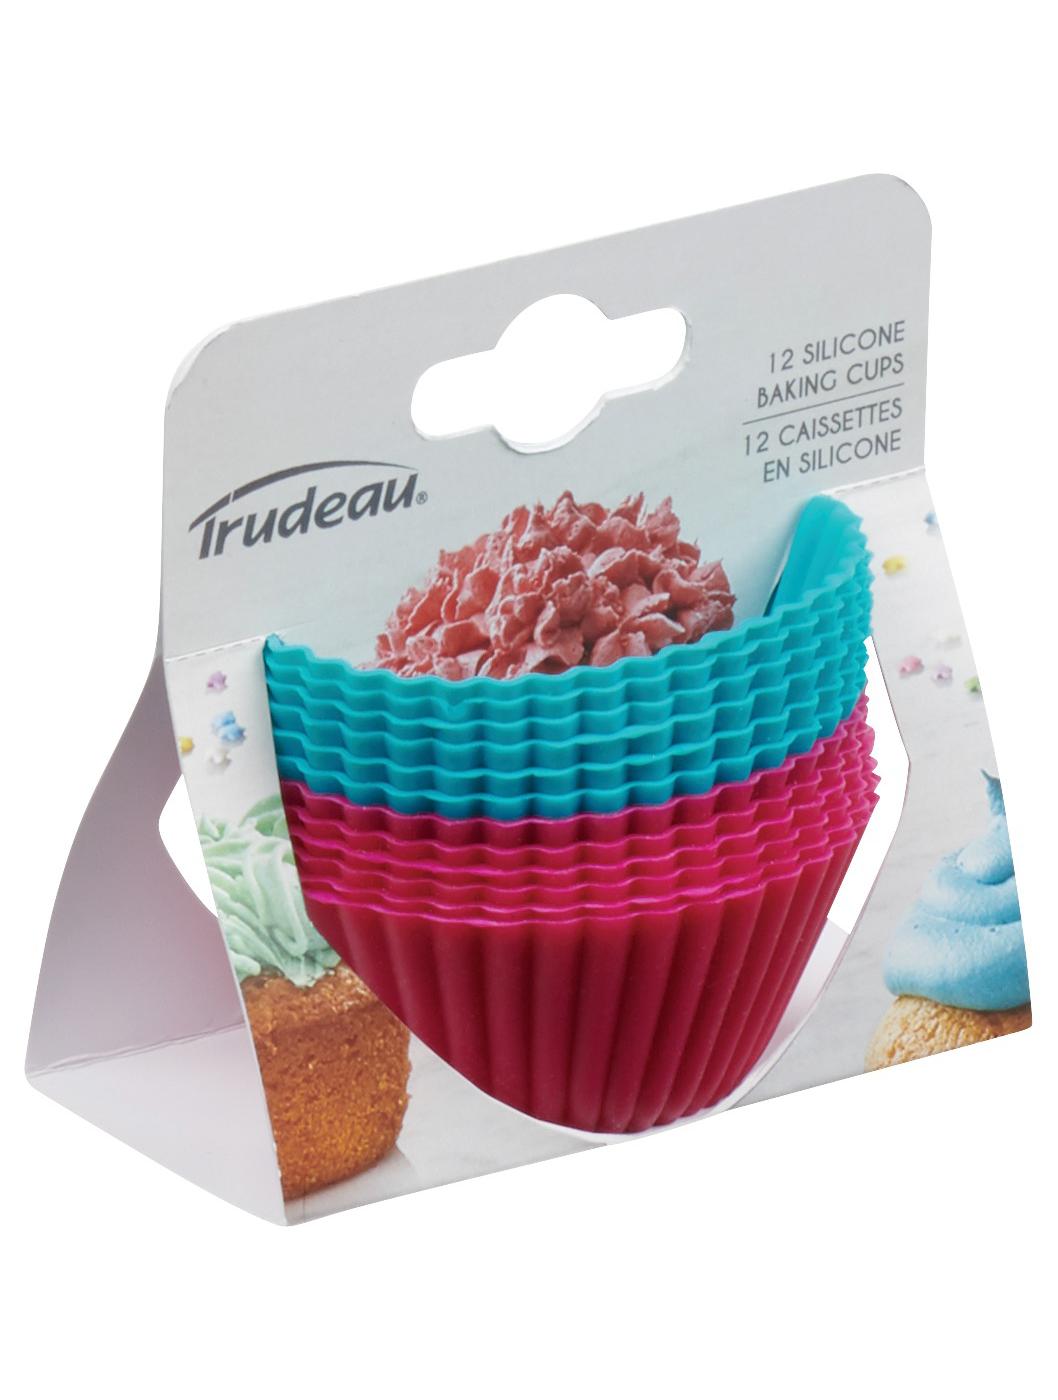 Trudeau Silicone Standard Baking Cups, Set of 12 - Spoons N Spice